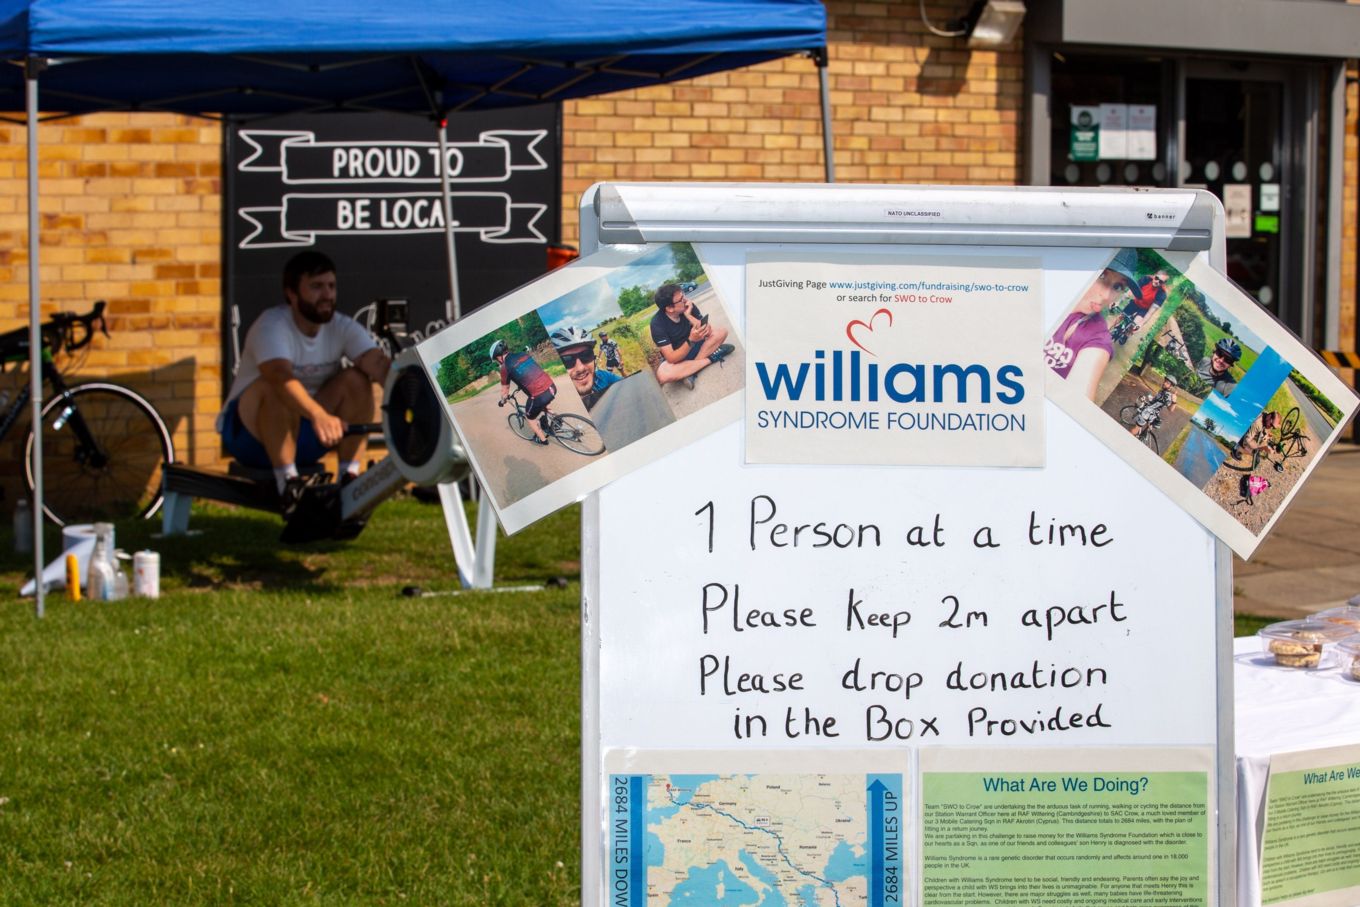 The fundraising stand set up outside the Wittering village shop on 24 Jun